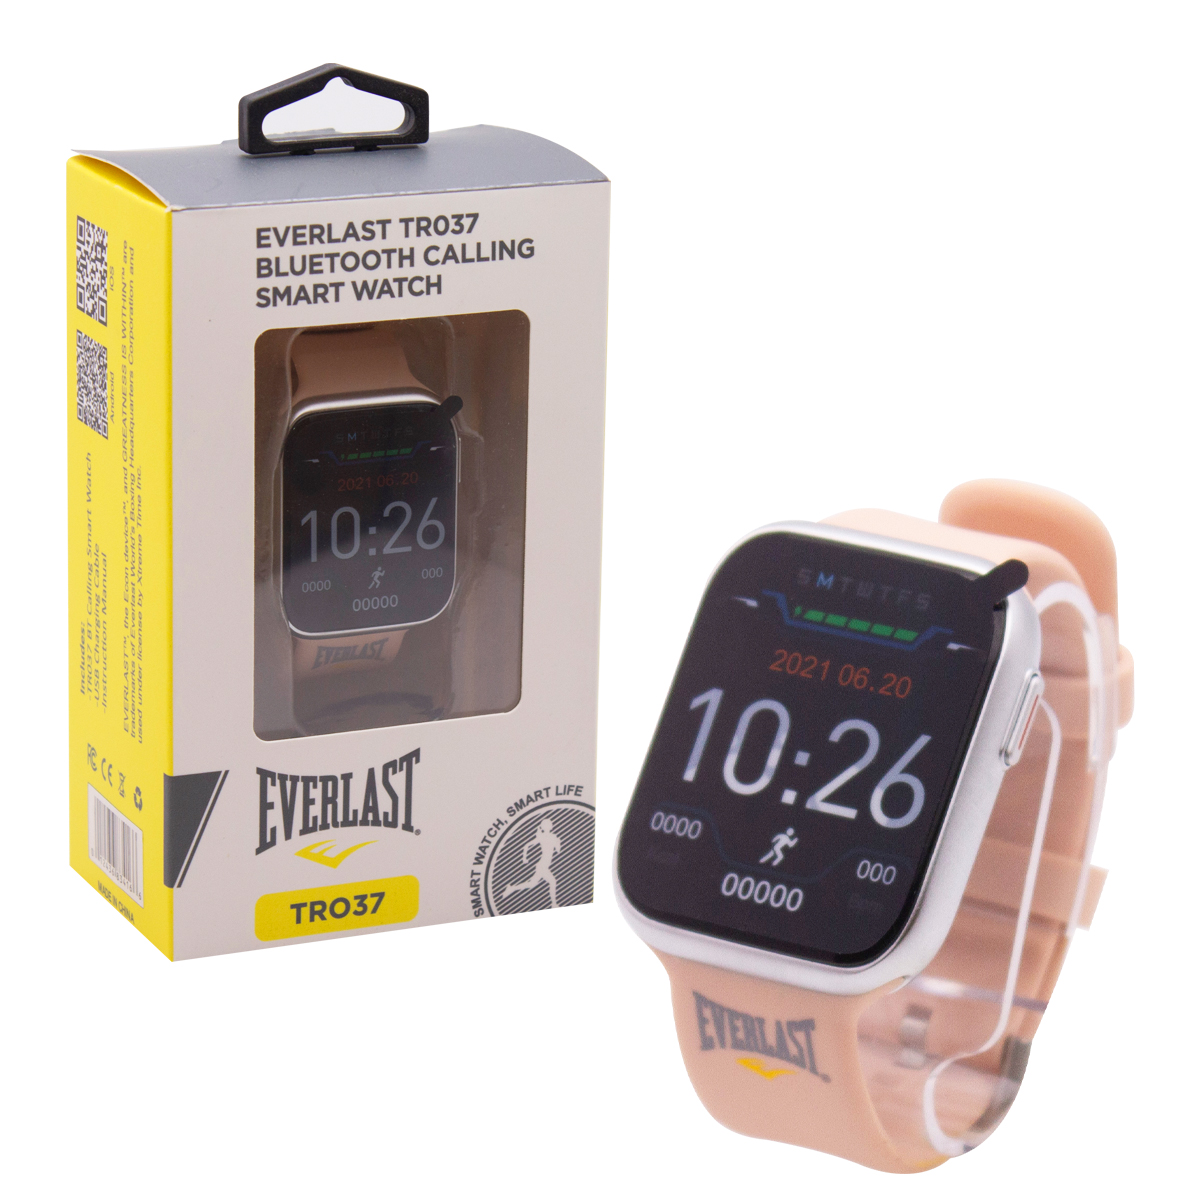 Photos - Other for Mobile Everlast ® TR037 Bluetooth Calling Smartwatch - Pink EVWTR037PK 